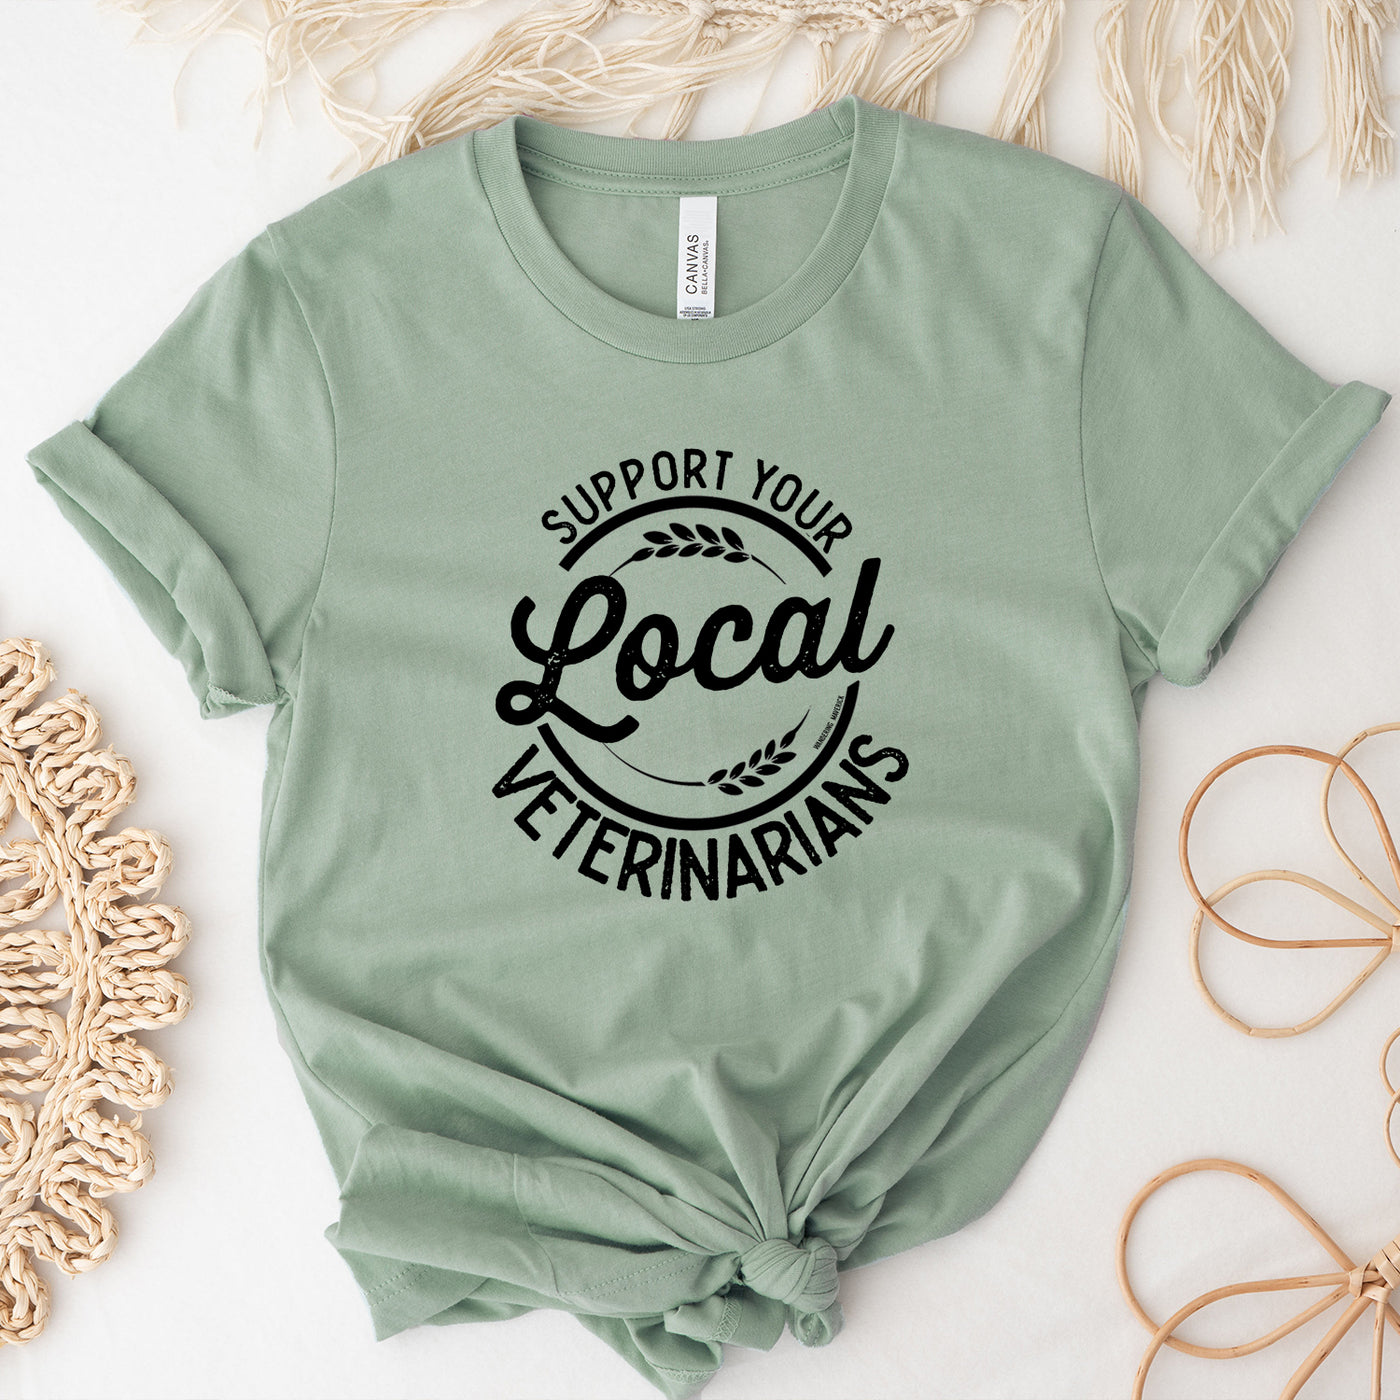 Support Your Local Veterinarians T-Shirt (XS-4XL) - Multiple Colors!